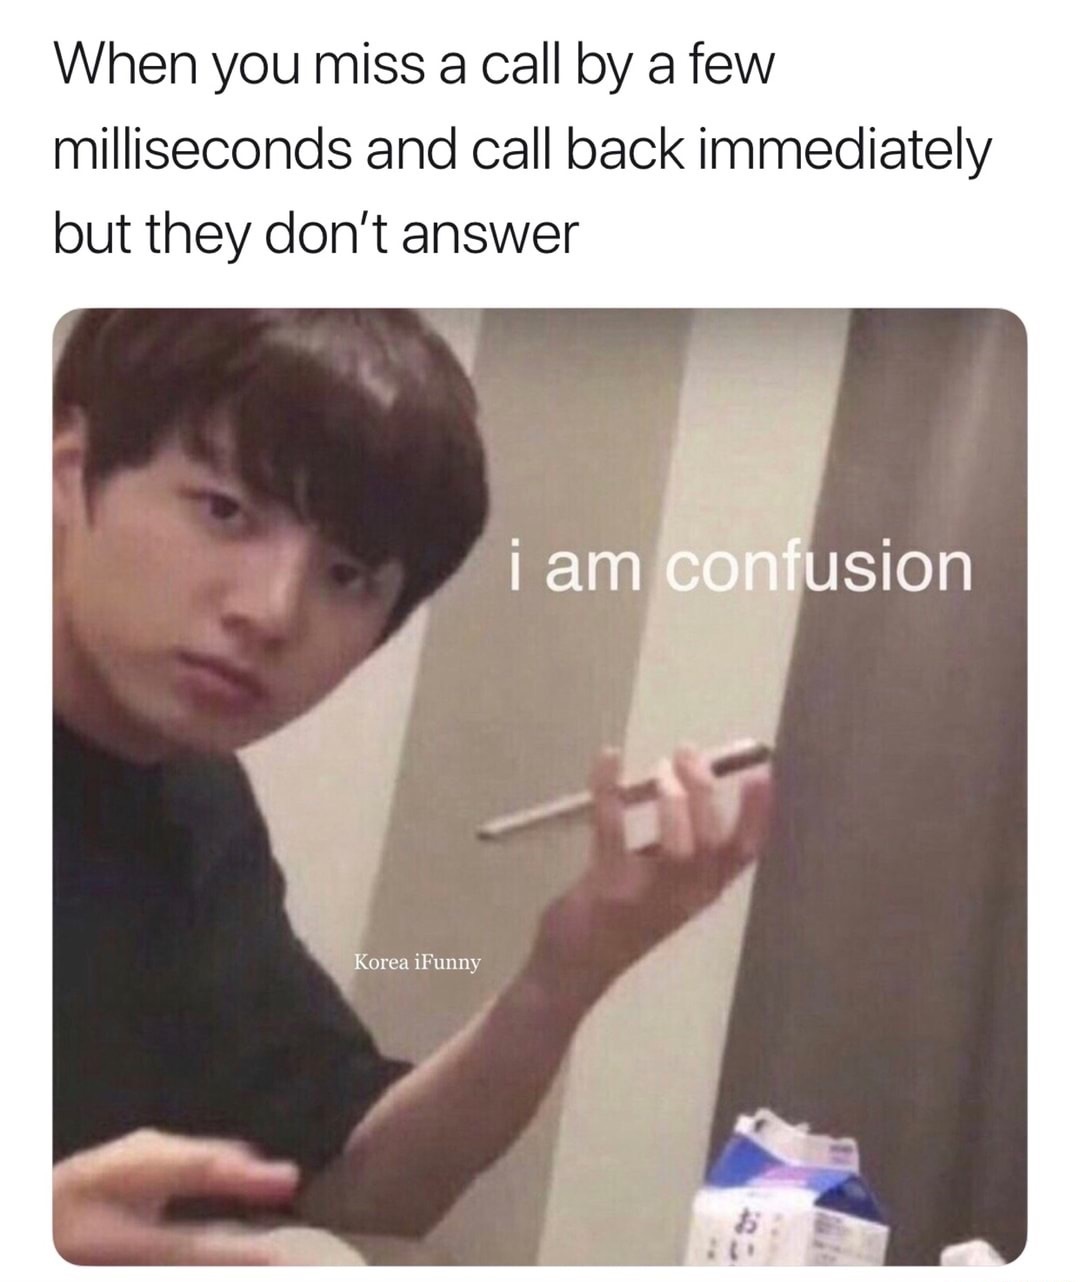 Thursday meme about jungkook memes - When you miss a call by a few milliseconds and call back immediately but they don't answer i am confusion Korea iFunny